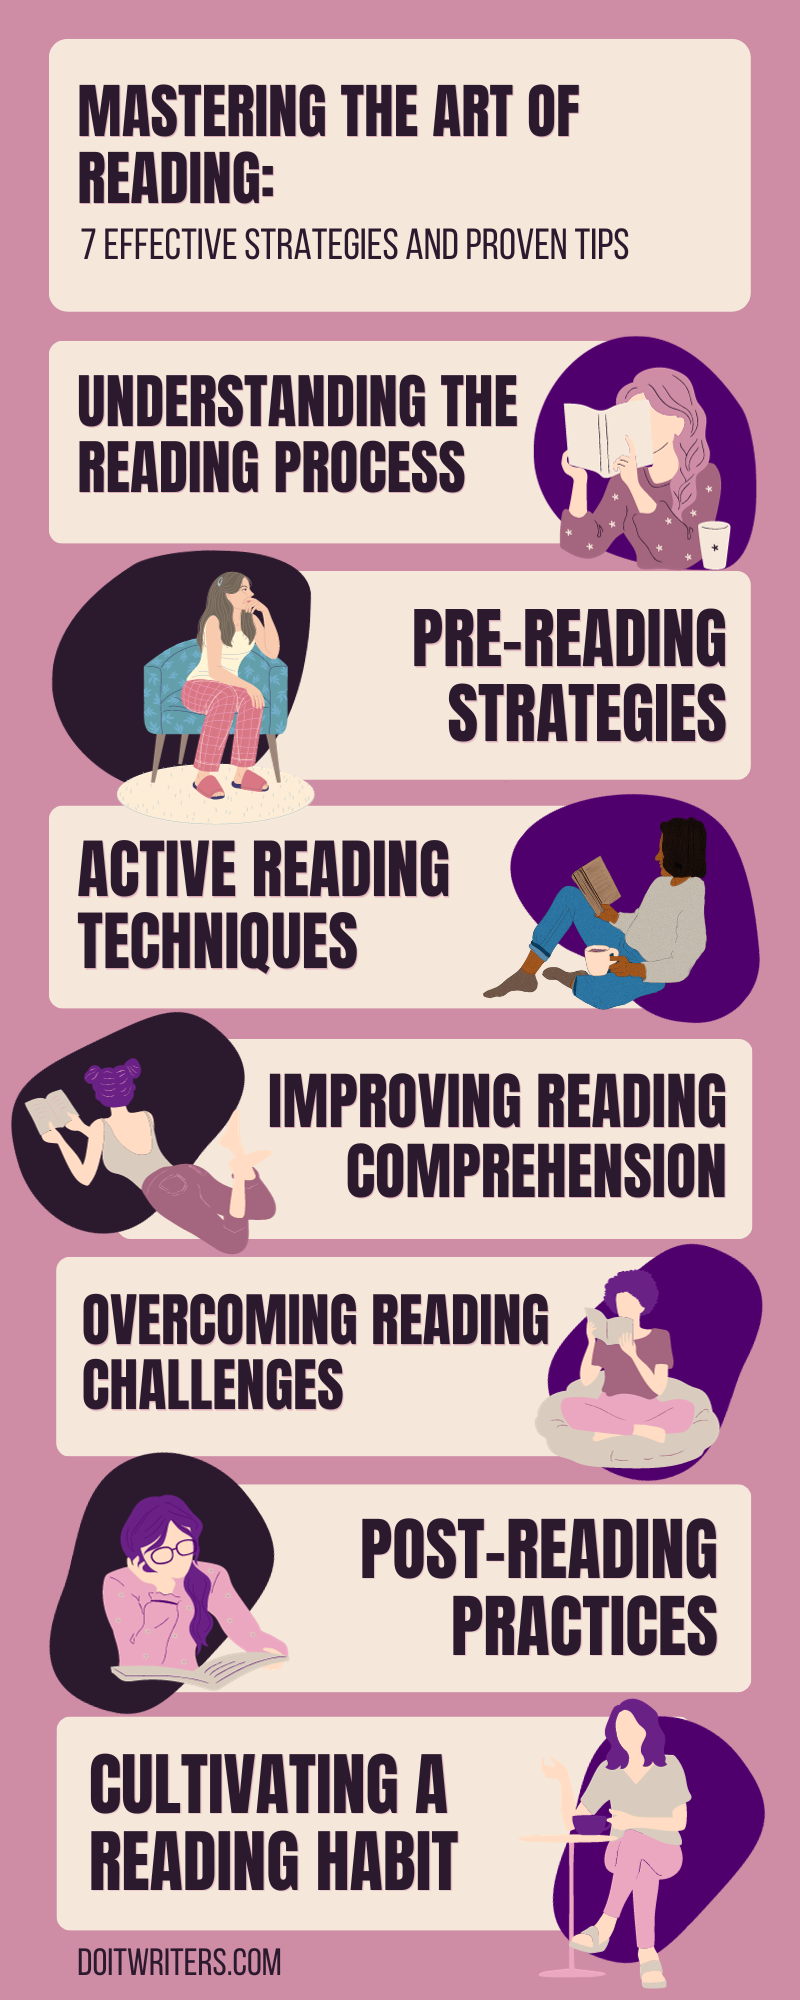 Mastering the Art of Reading: 7 Effective Strategies and Proven Tips